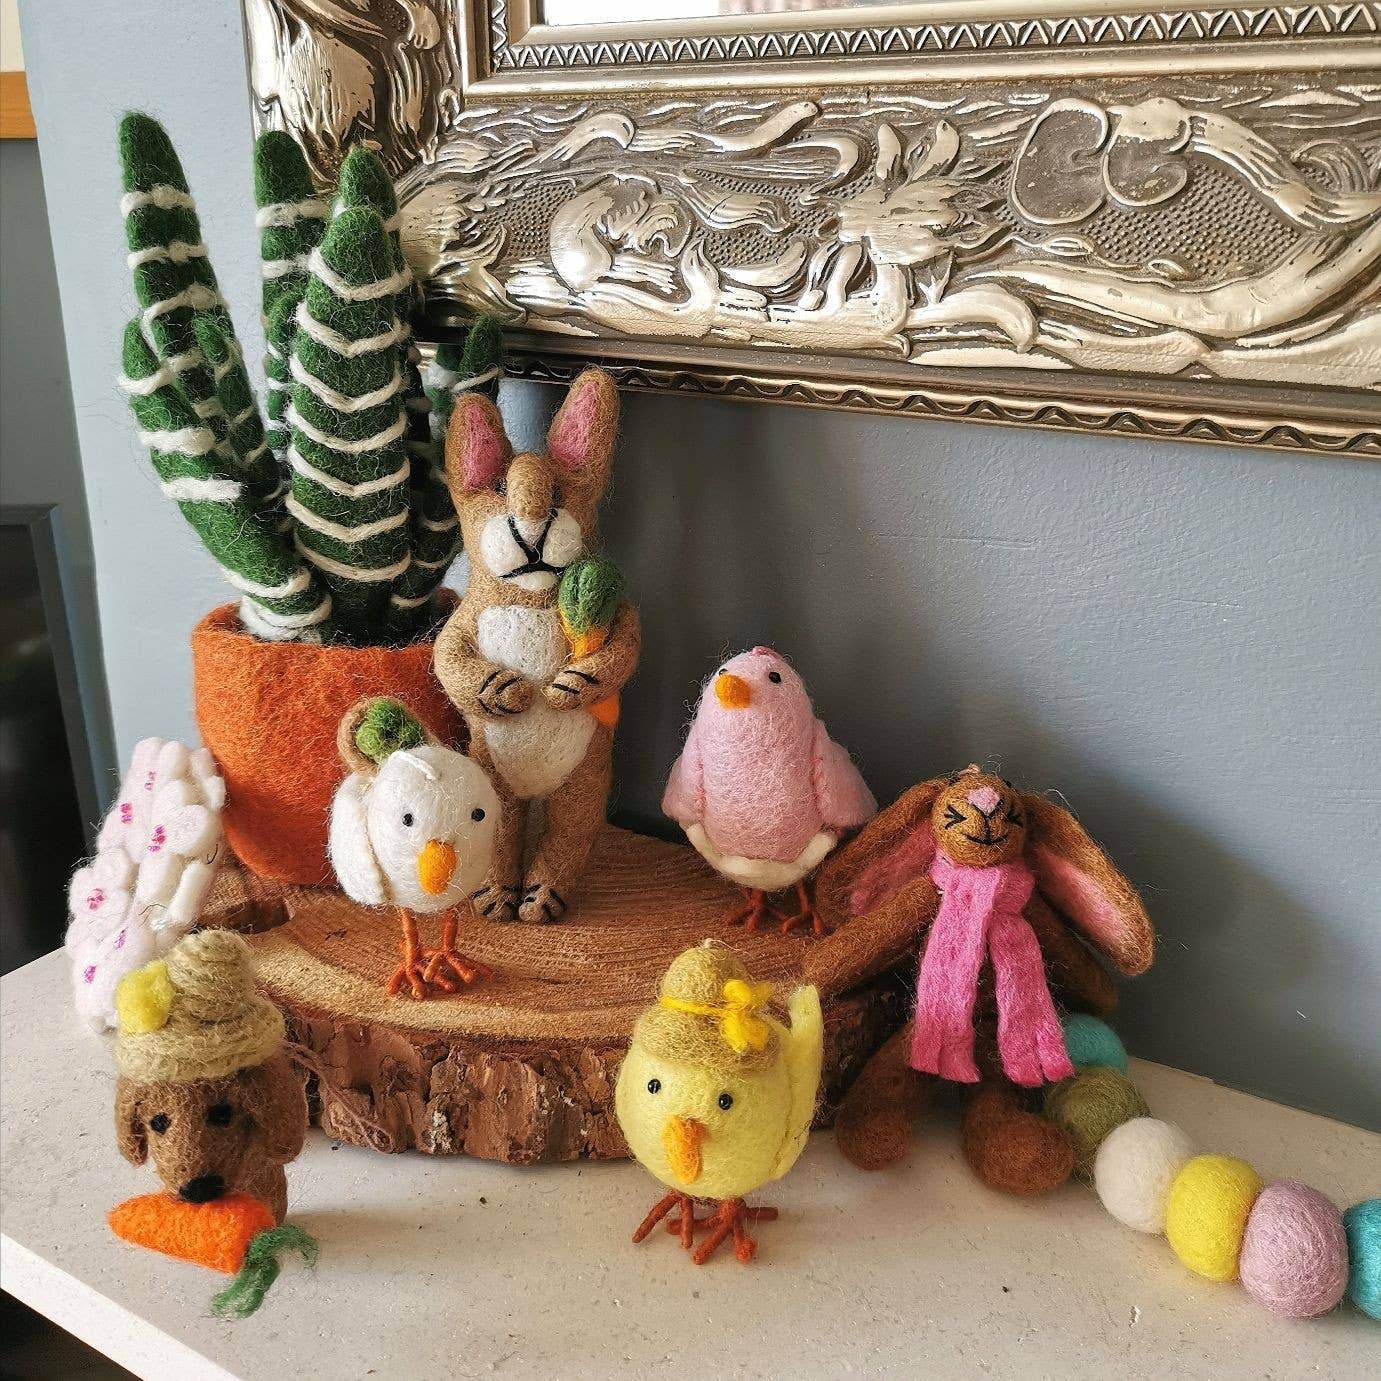 Chirpy Chicks Hanging Easter Decoration